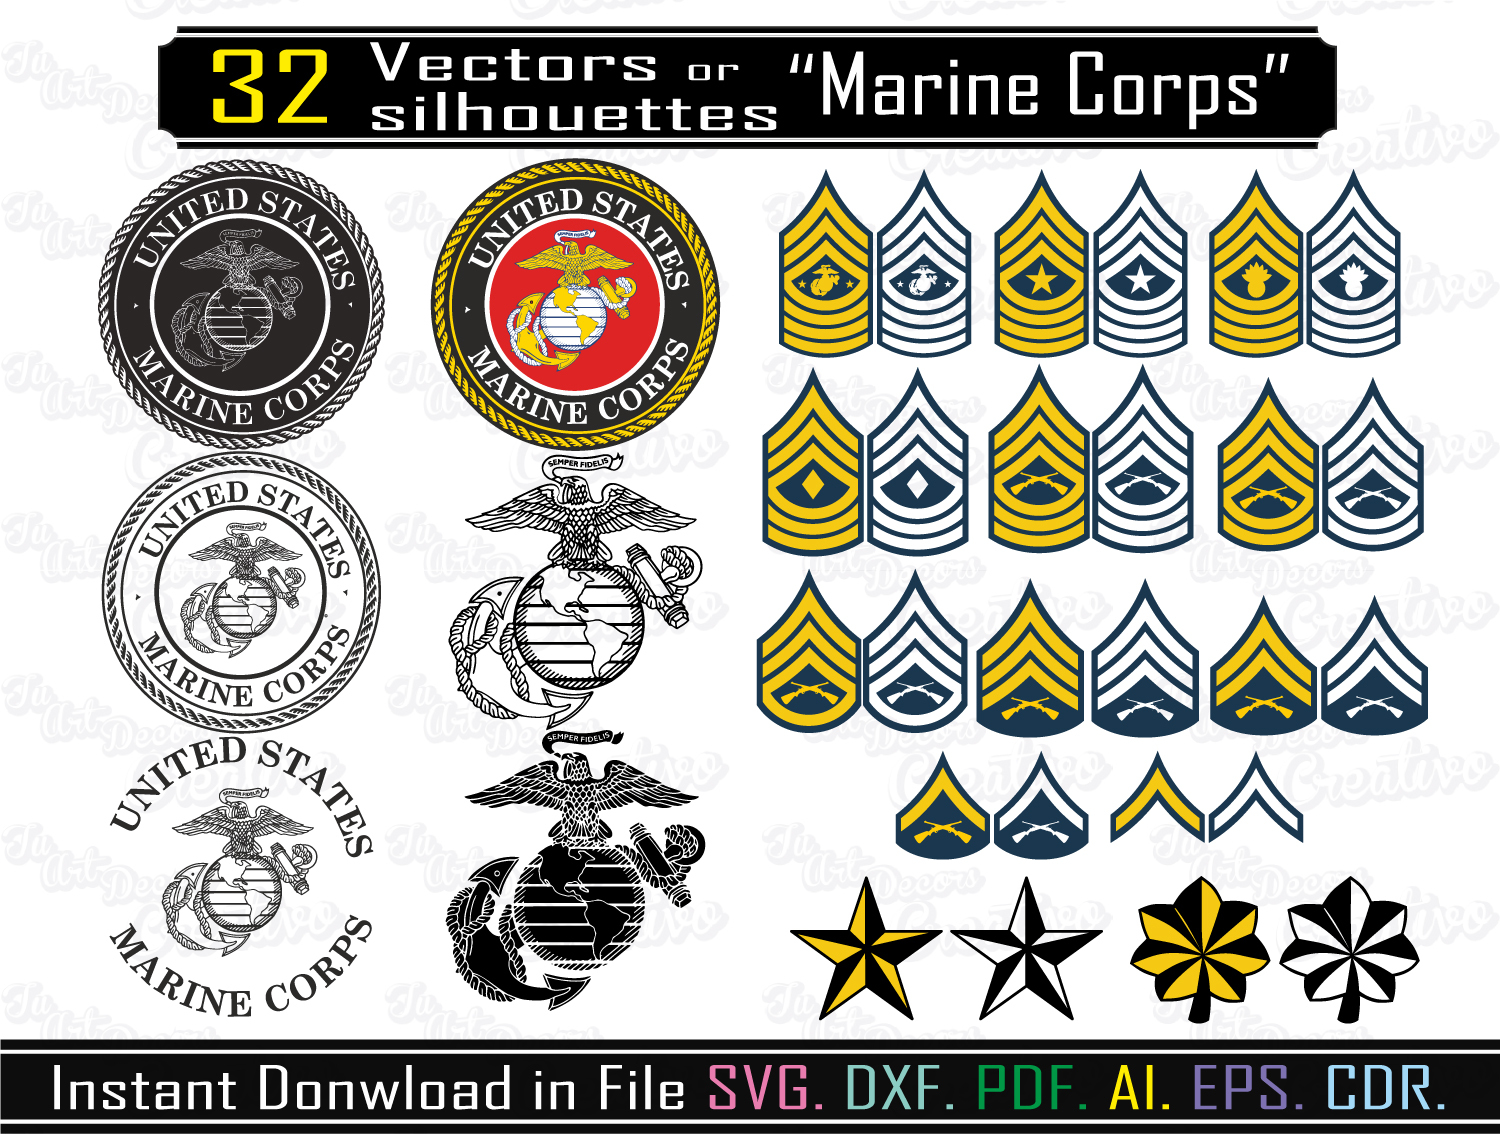 Download Marine Corps Svg, Vector for cameo or laser cuts, Emblem and Ranges Marine Corps - Digital Art